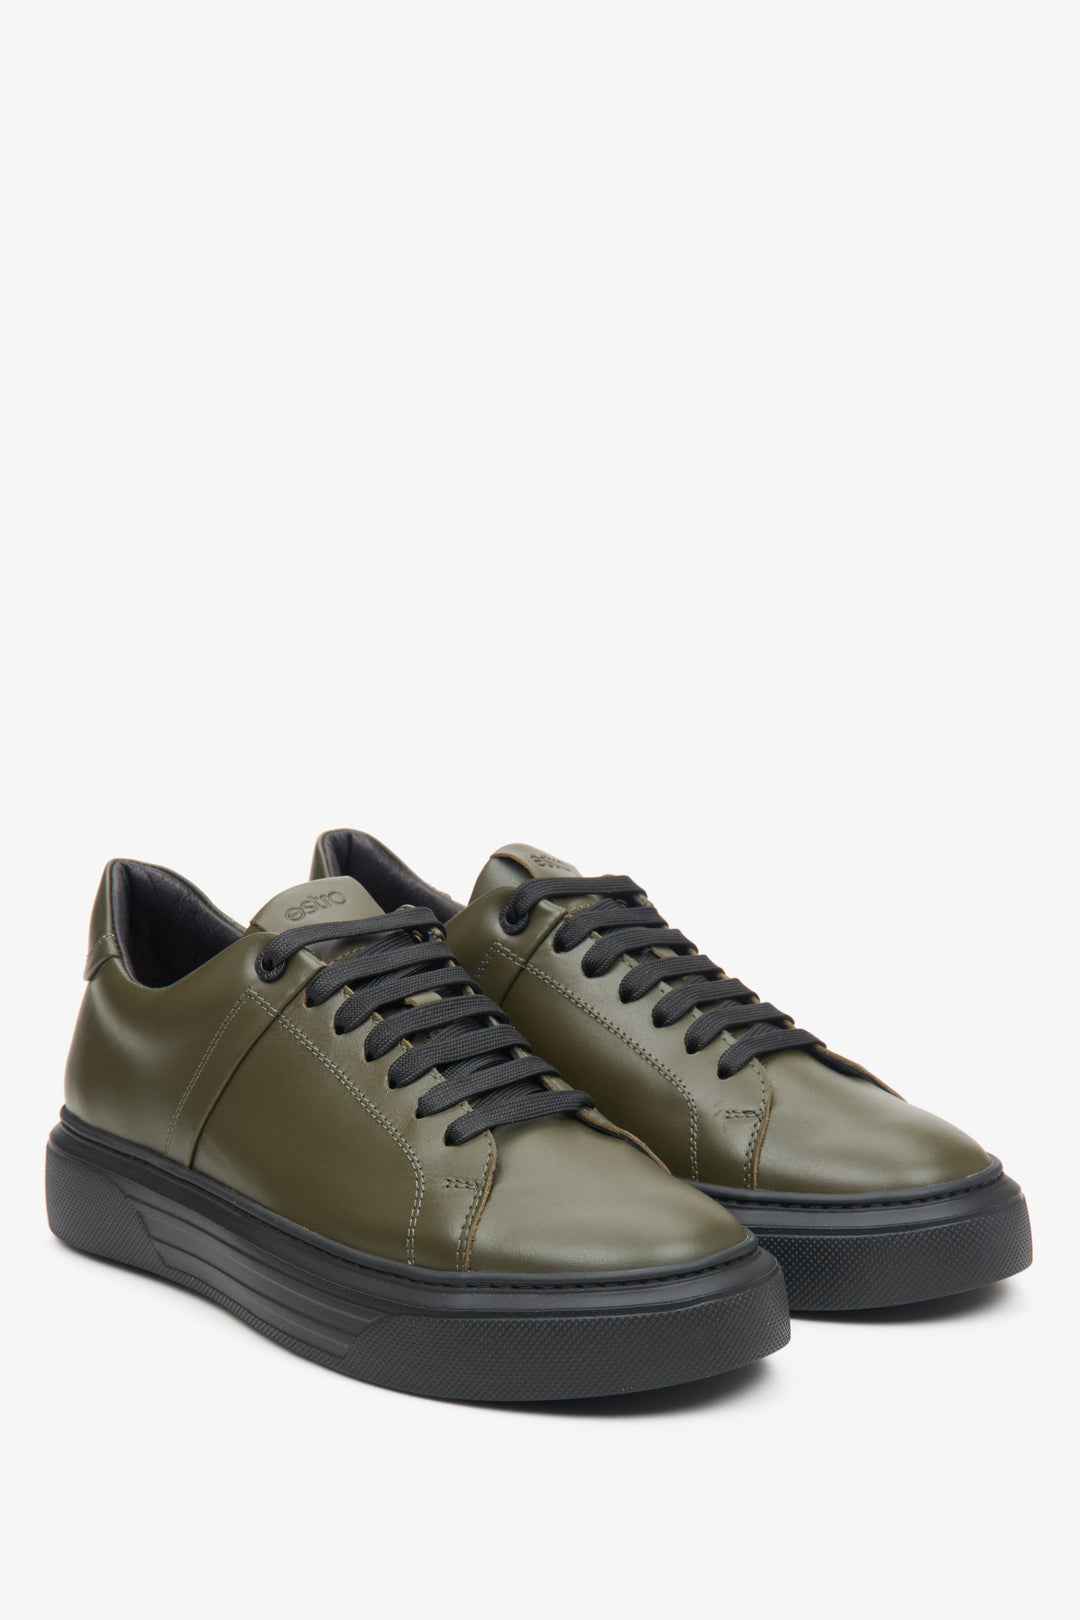 Men's leather sneakers in khaki - close-up of the toe and side seam.